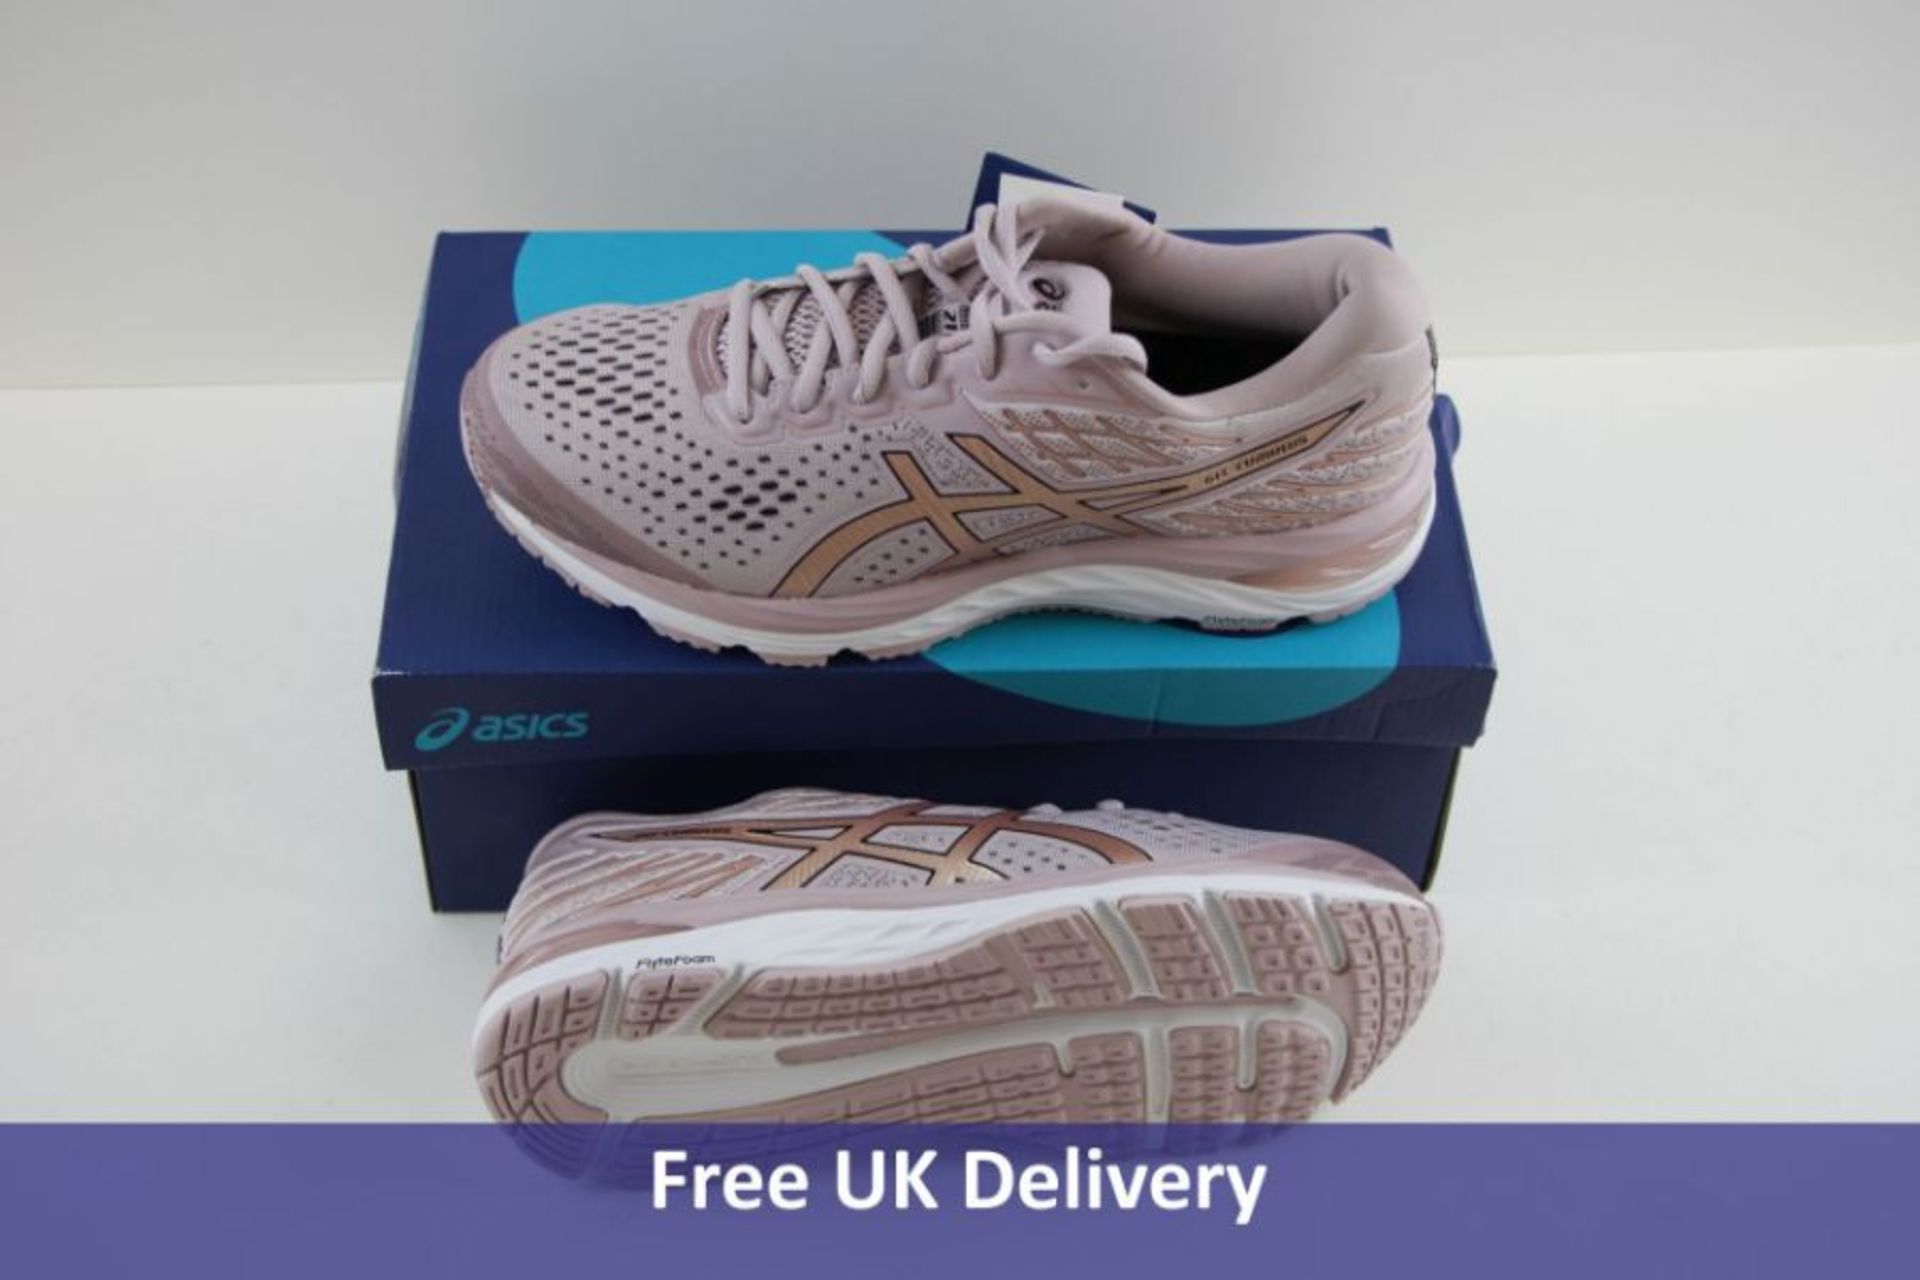 Asics Women's Gel Cumulus 21 Trainers, Watershed Rose and Rose Gold, UK 8.5